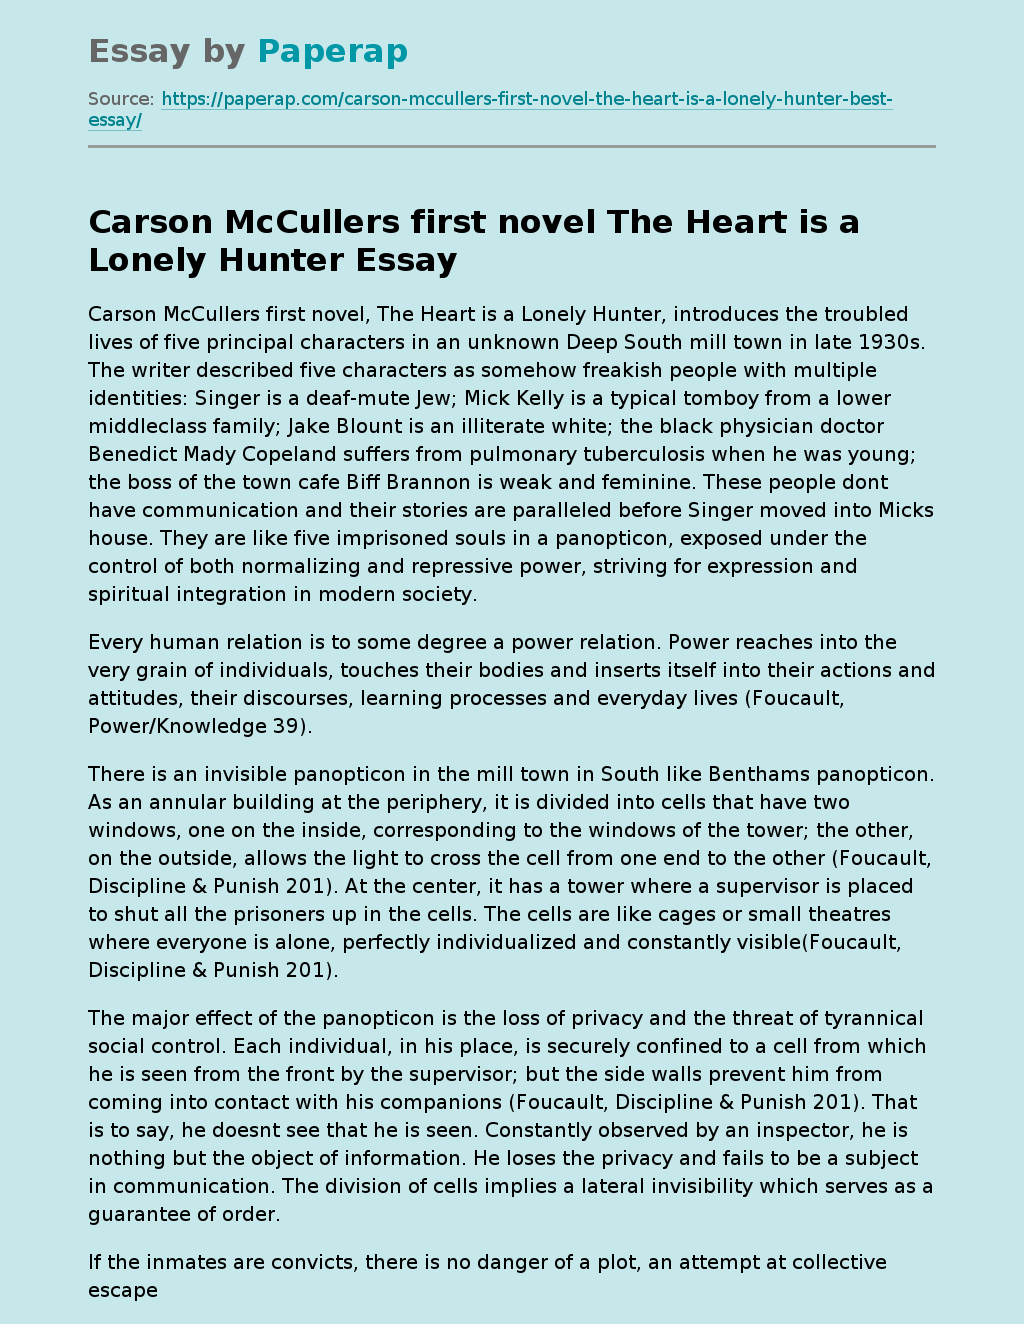 Carson McCullers first novel The Heart is a Lonely Hunter